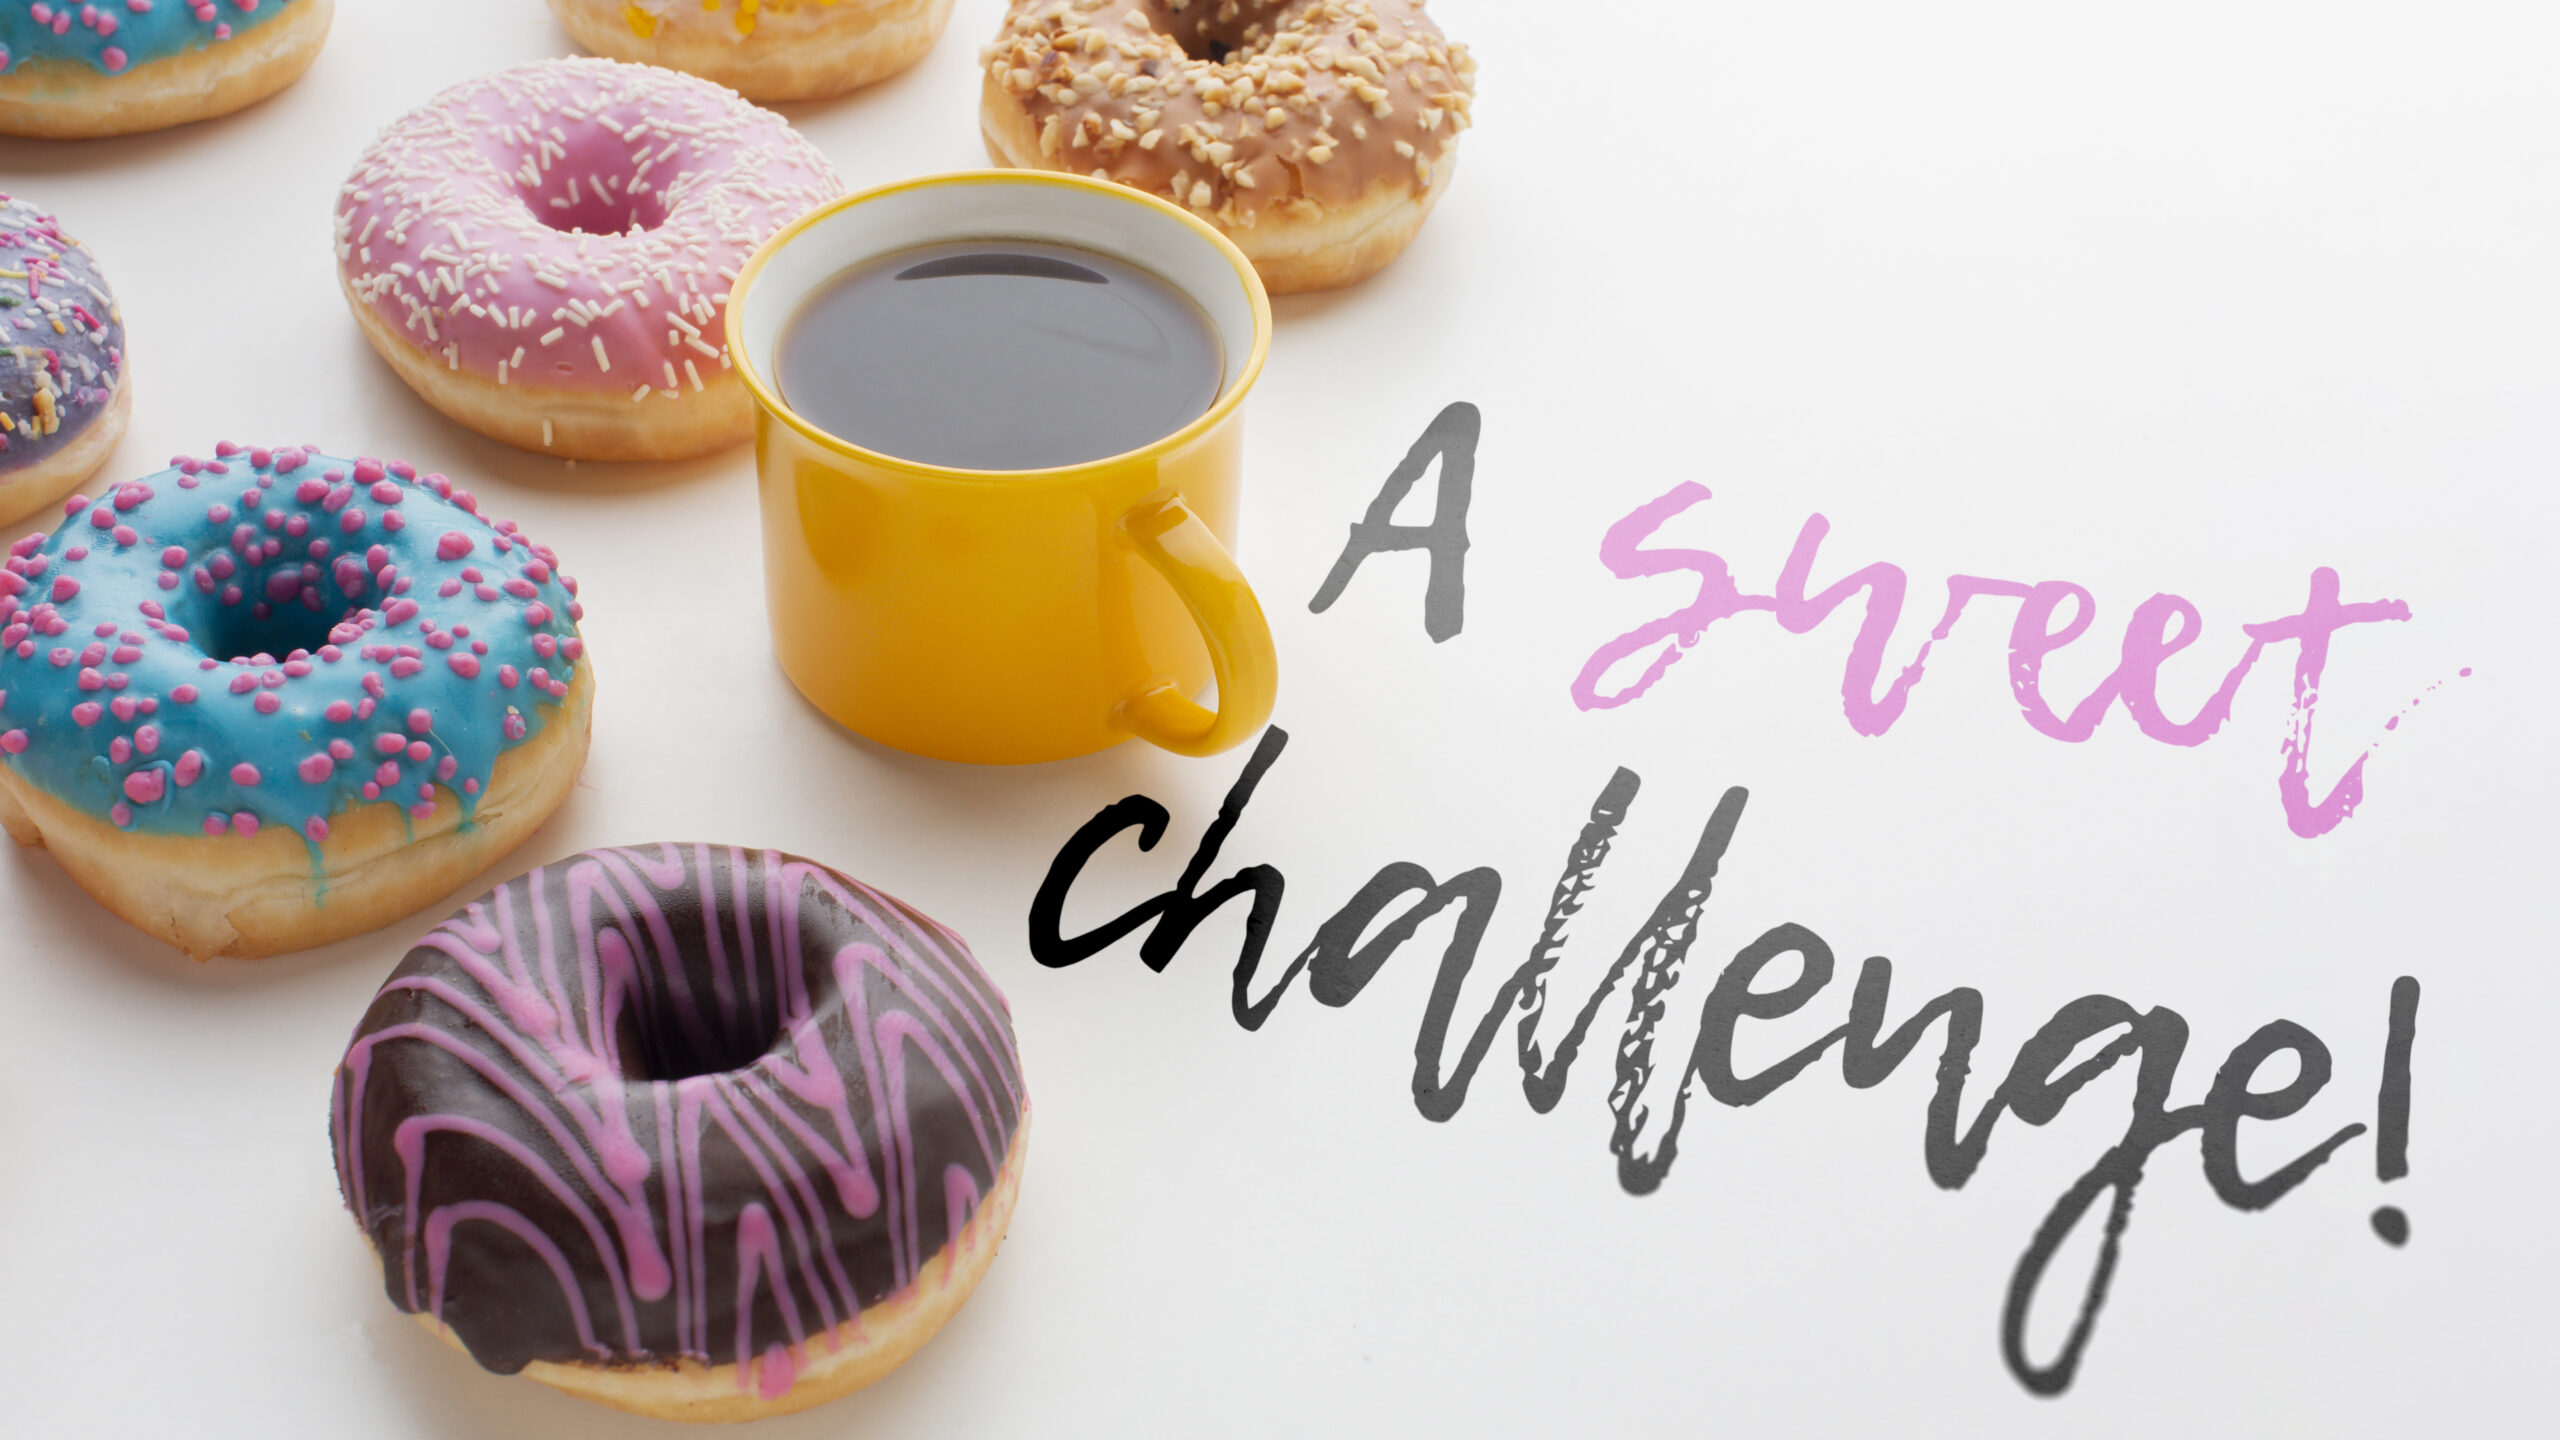 A Sweet Challenge – Cutting back on sugars